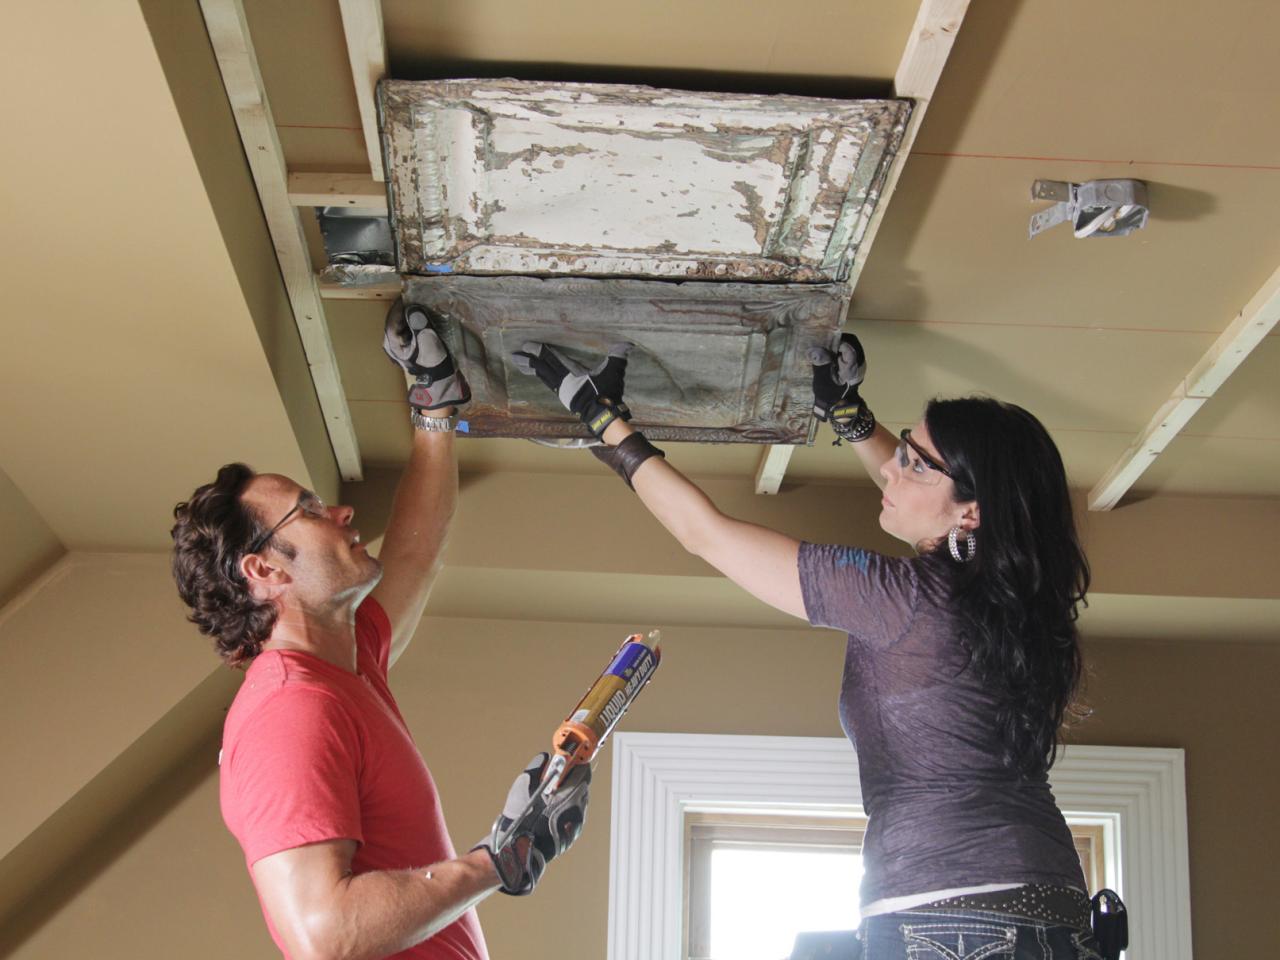 How To Install A Stamped Tin Ceiling, Tin Ceiling Tile Designs